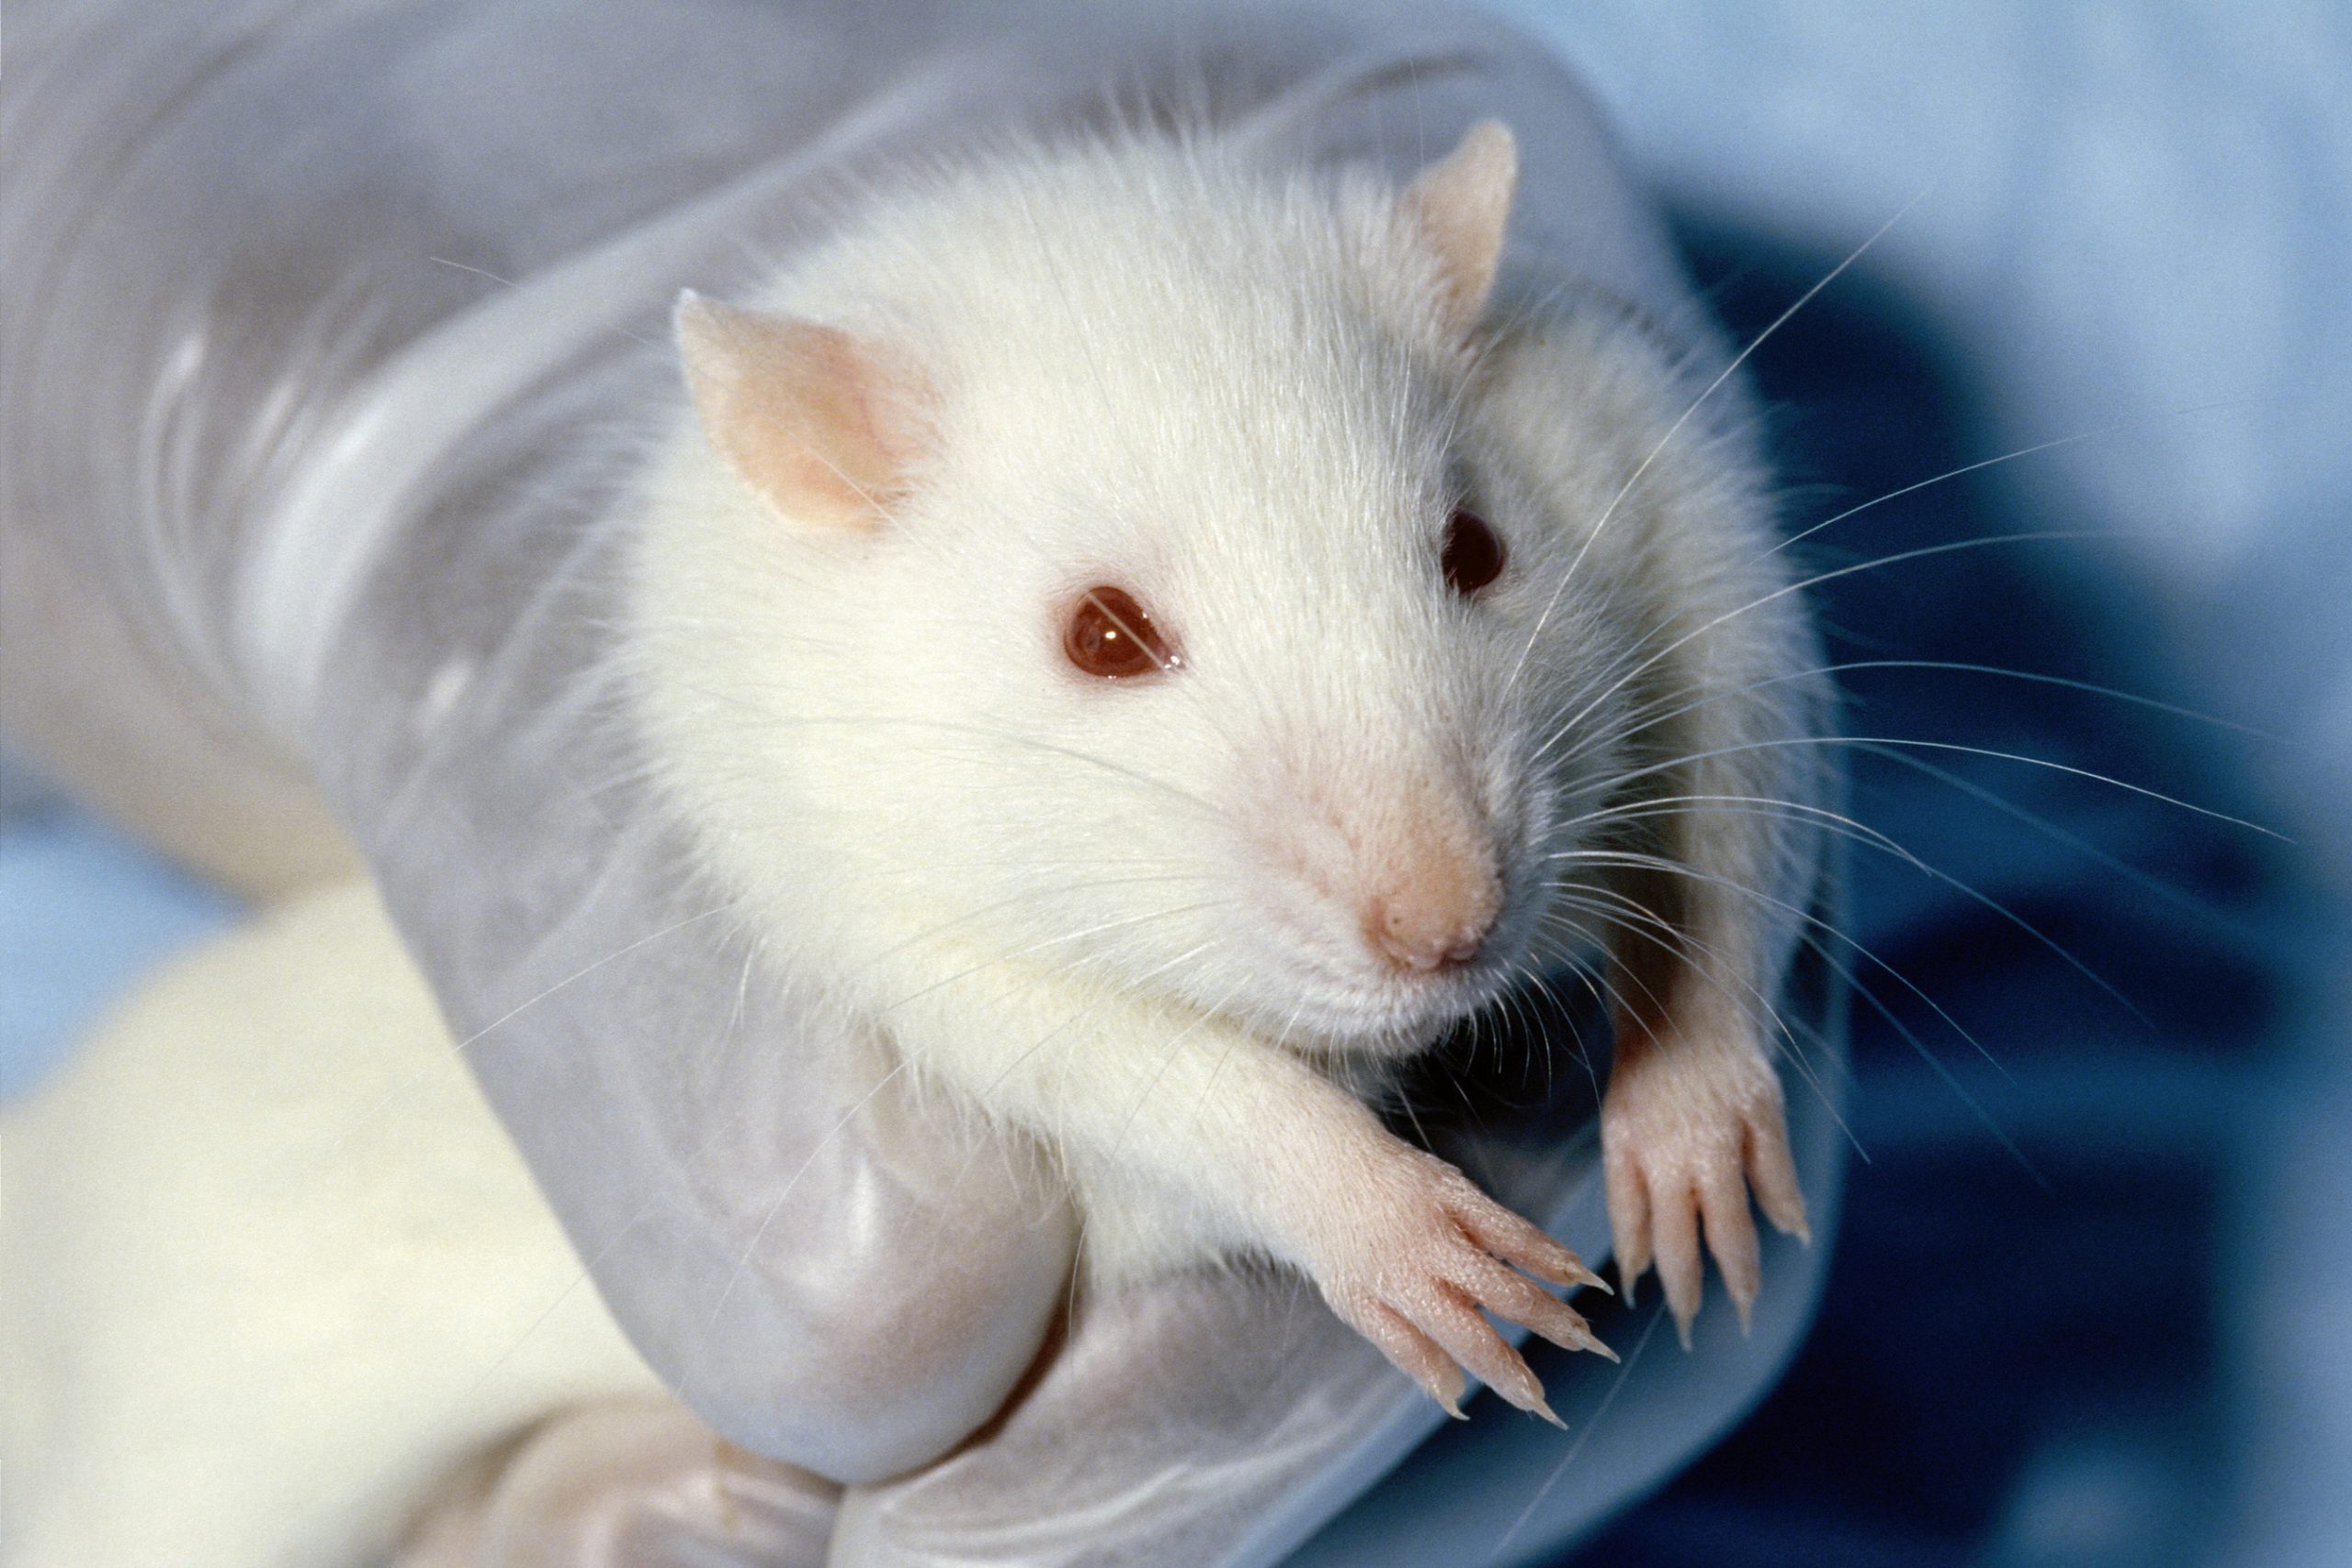 This picture shows a gloved hand holding a white rat.